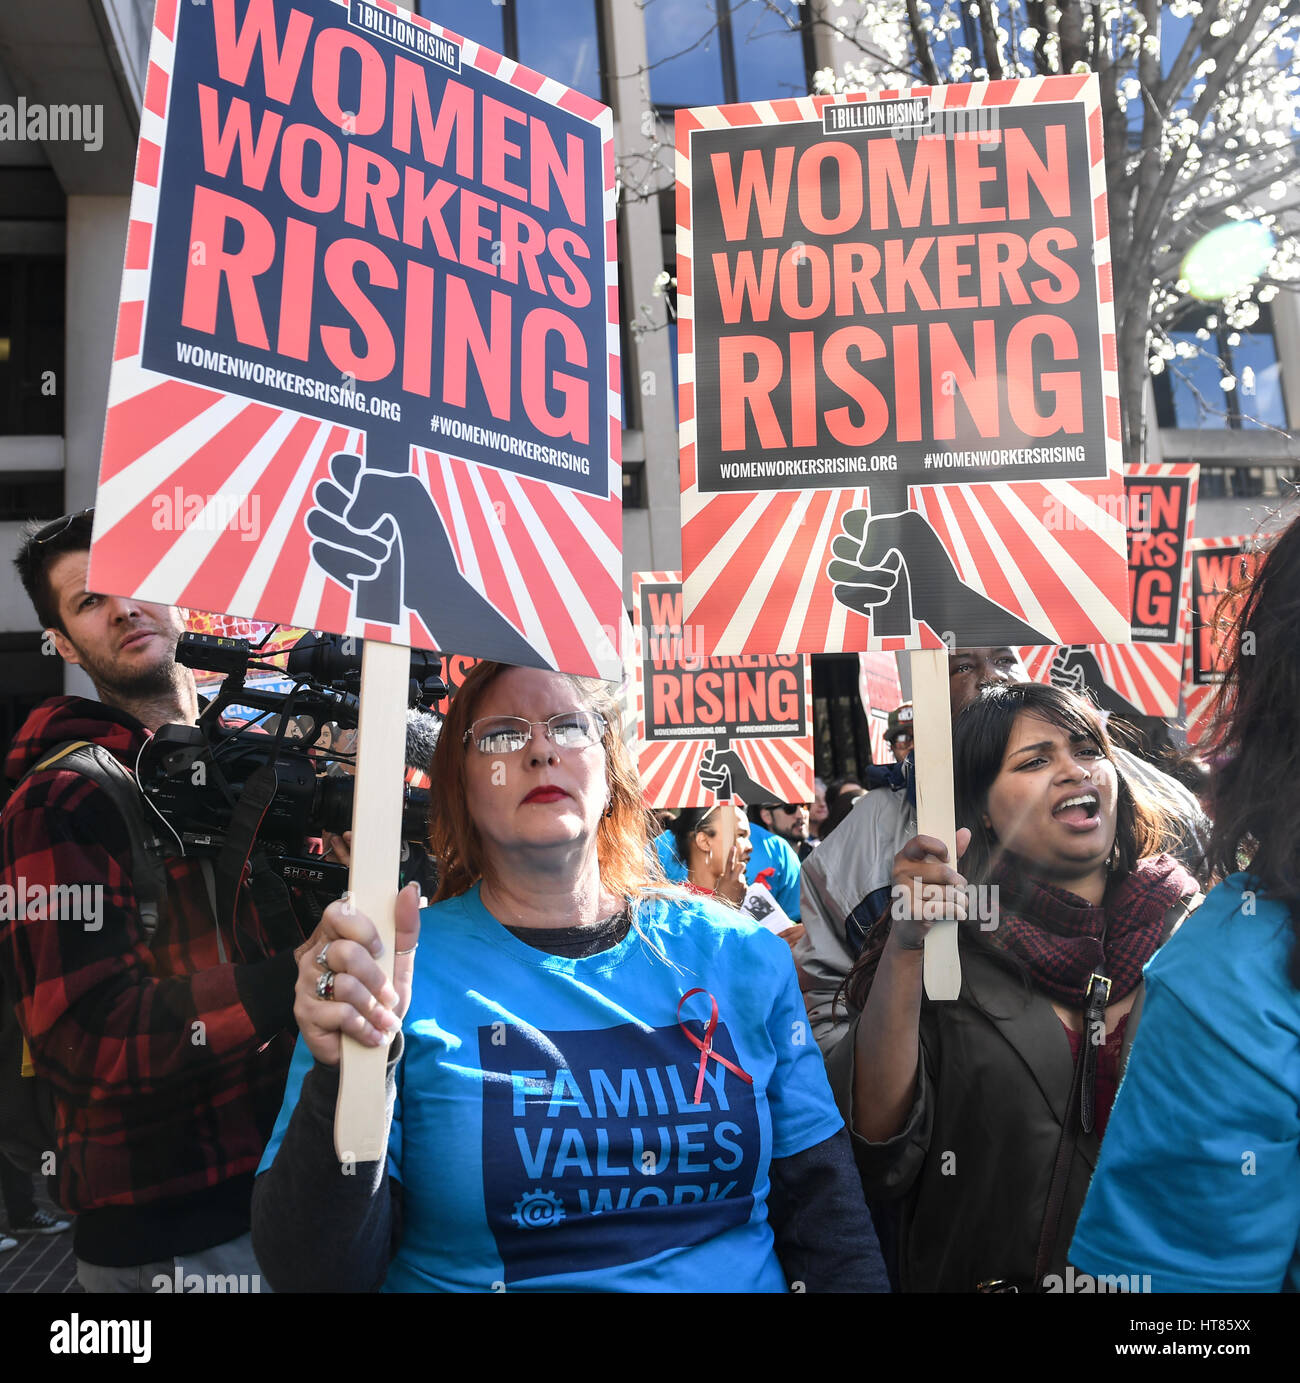 Washington, USA. 8th Mar, 2017. A rally with women workers on International Women's Day is held at the U.S. Department of Labor in Washington, DC, the United States, on March 8, 2017. The rally here on Wednesday called for an end to workplace violence and harassment and promotion of pay equity, a fair living wage, paid leave, and labor rights for women at work. Credit: Bao Dandan/Xinhua/Alamy Live News Stock Photo